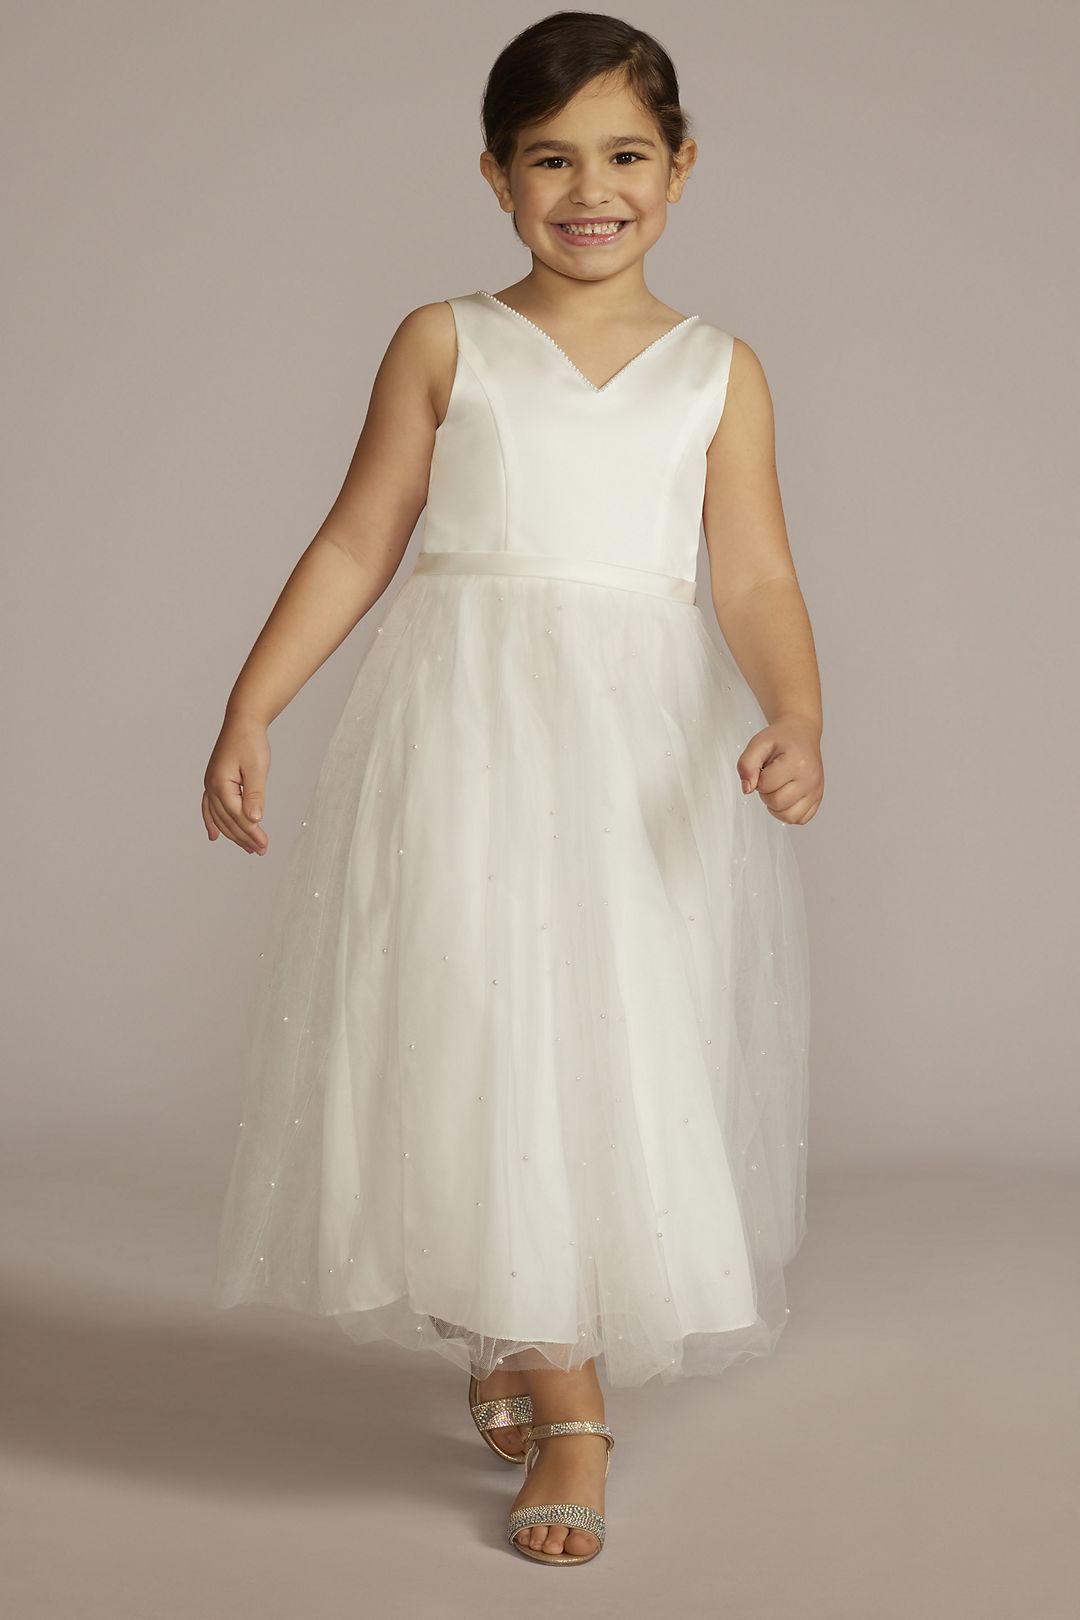 V-Back Tulle Flower Girl Dress with Pearls and Bow Image 1